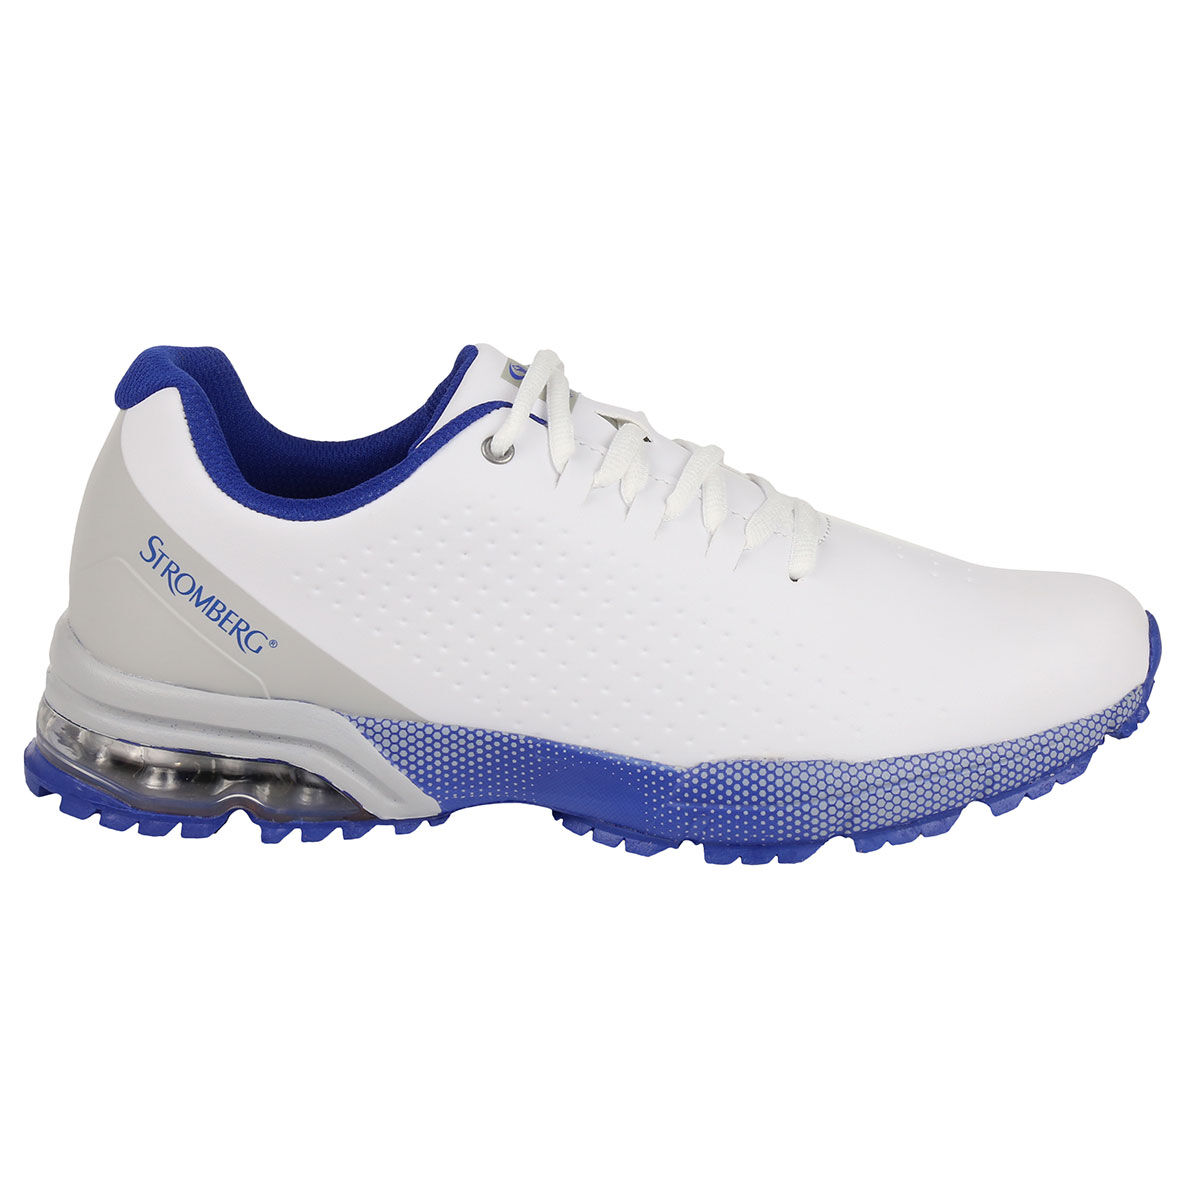 Stromberg White and Blue Waterproof Ailsa Spikeless Golf Shoes, Size: 10 | American Golf von Stromberg